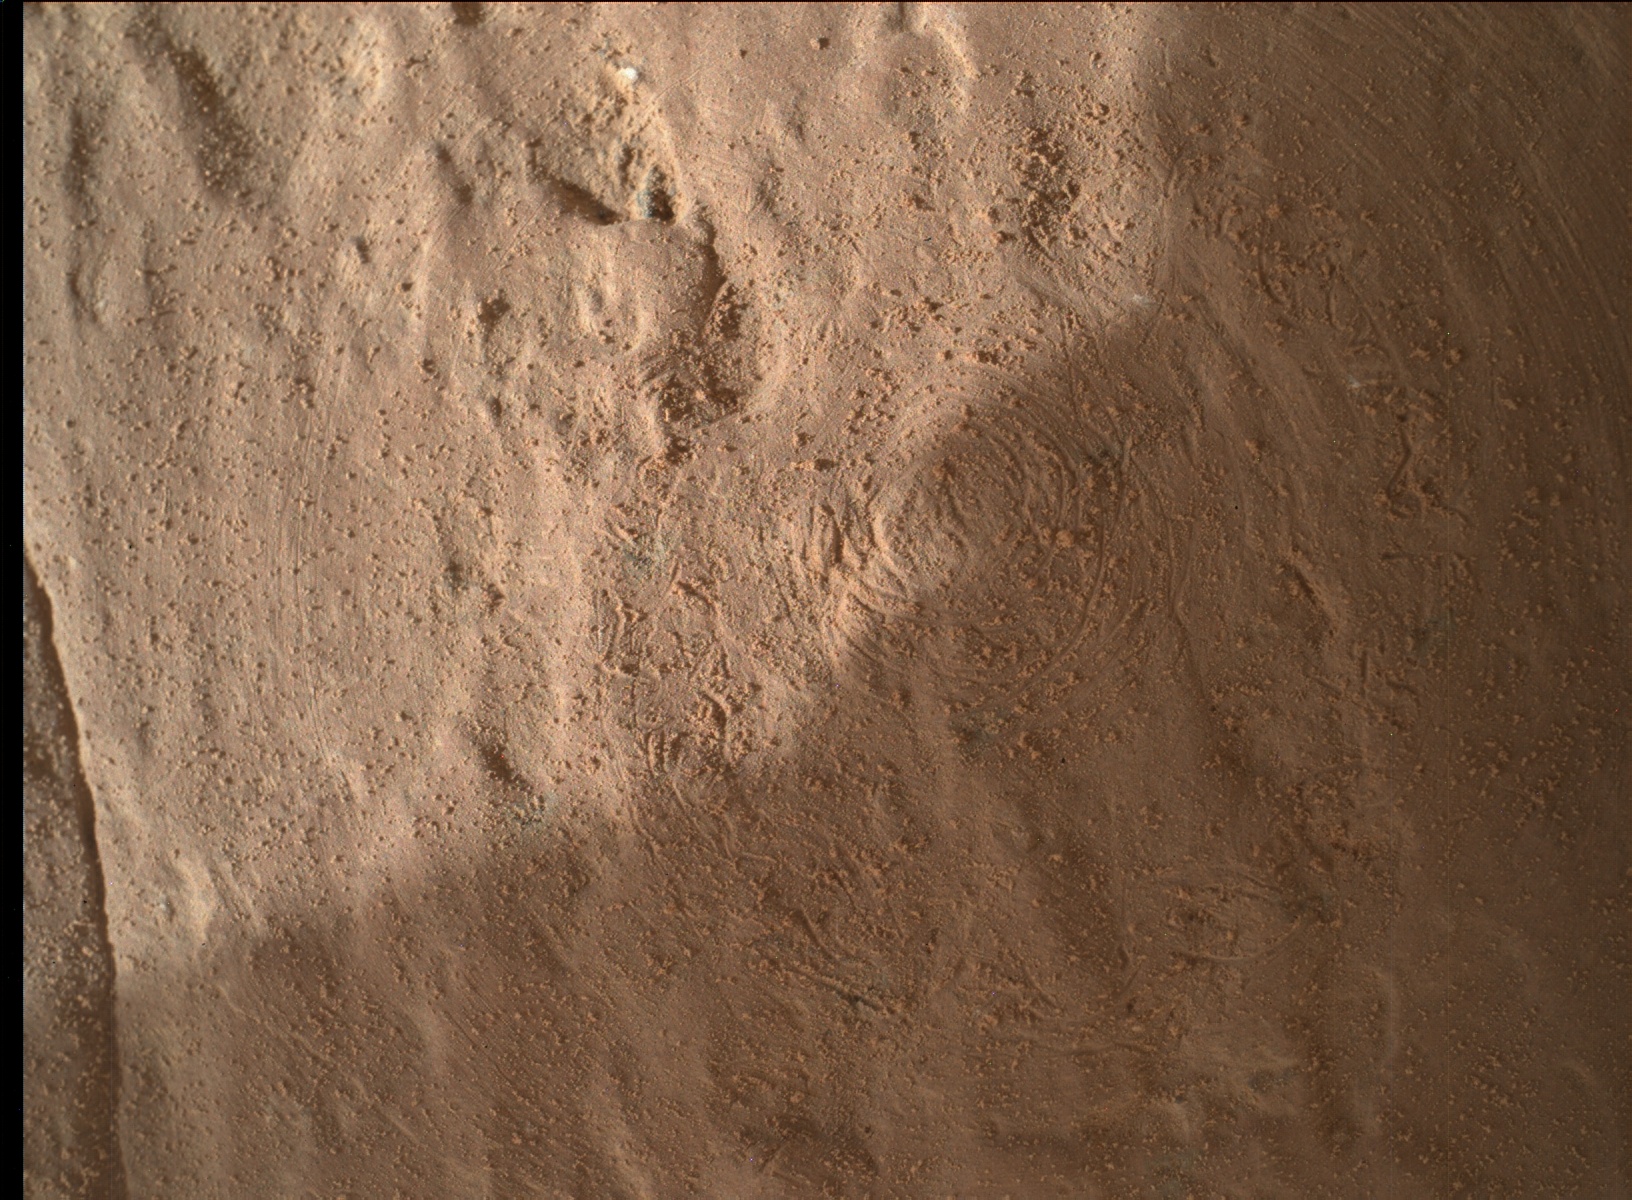 Nasa's Mars rover Curiosity acquired this image using its Mars Hand Lens Imager (MAHLI) on Sol 1531